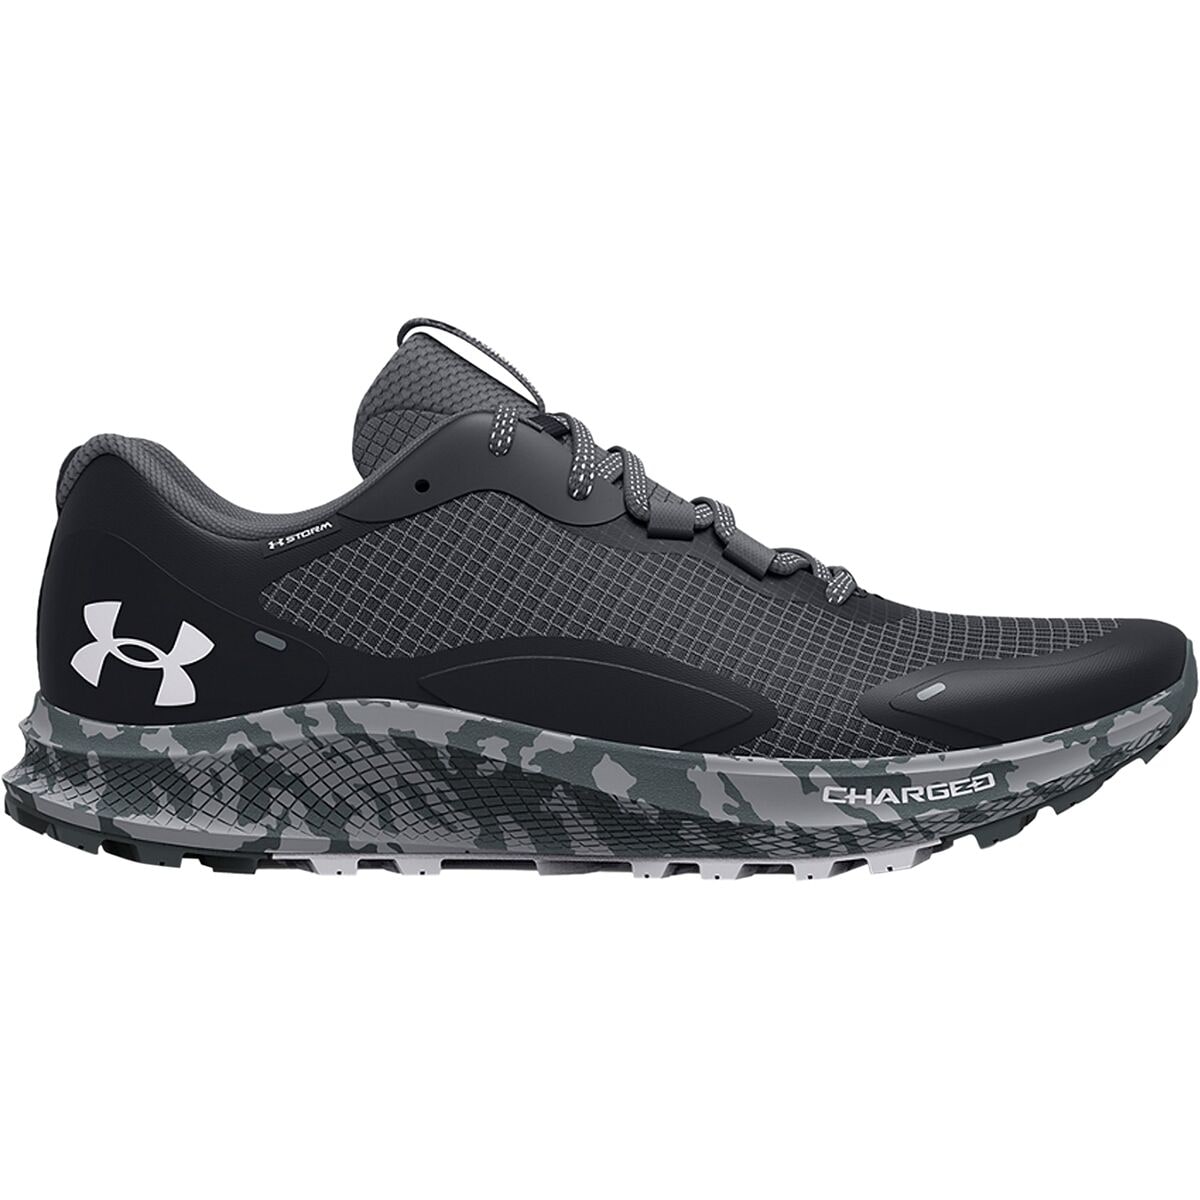 Under Armour Charged Bandit 2 Trail Running Shoe - Men's